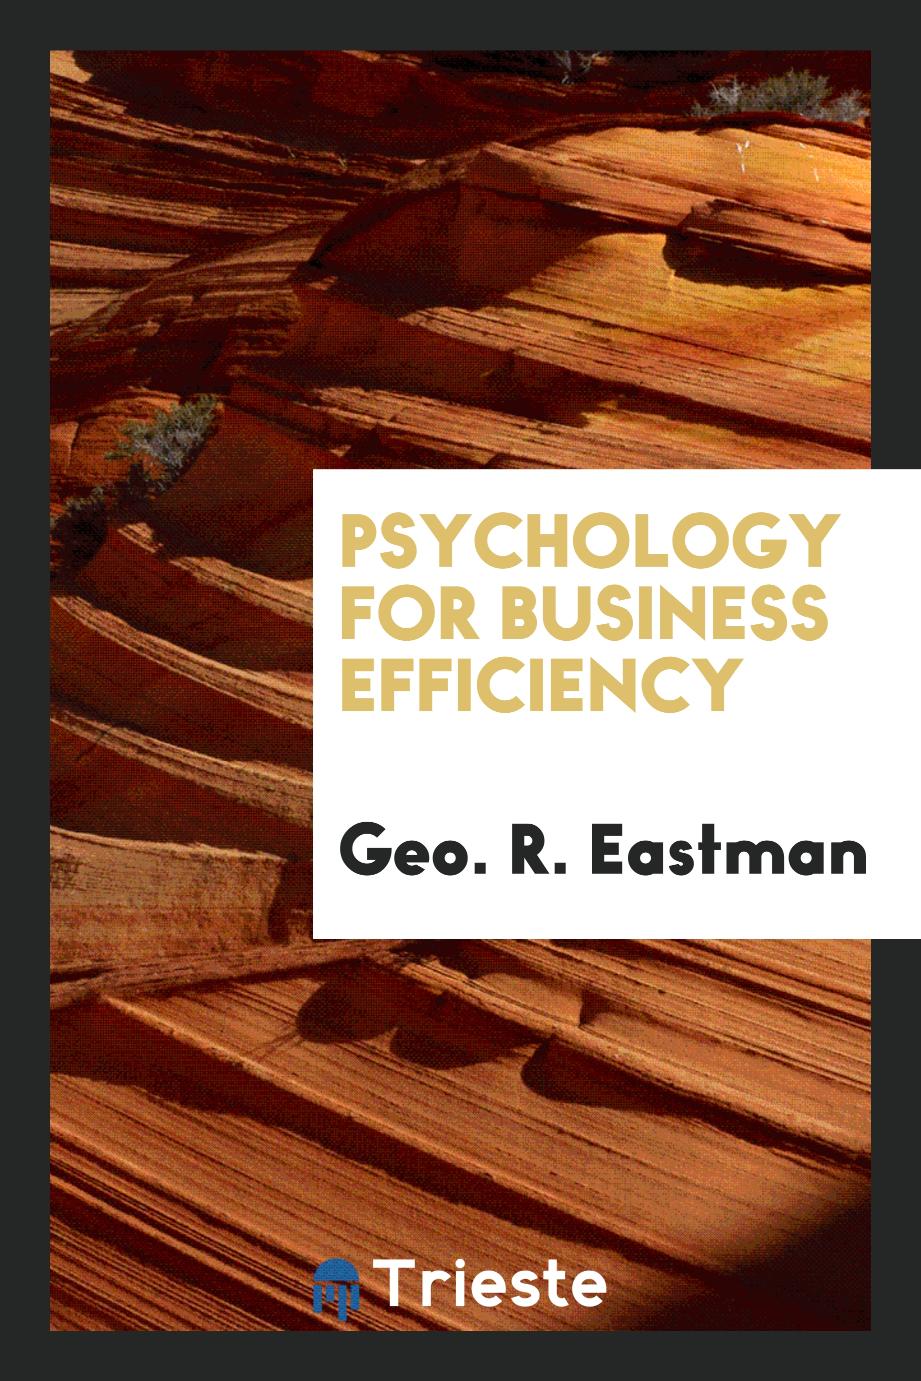 Psychology for business efficiency